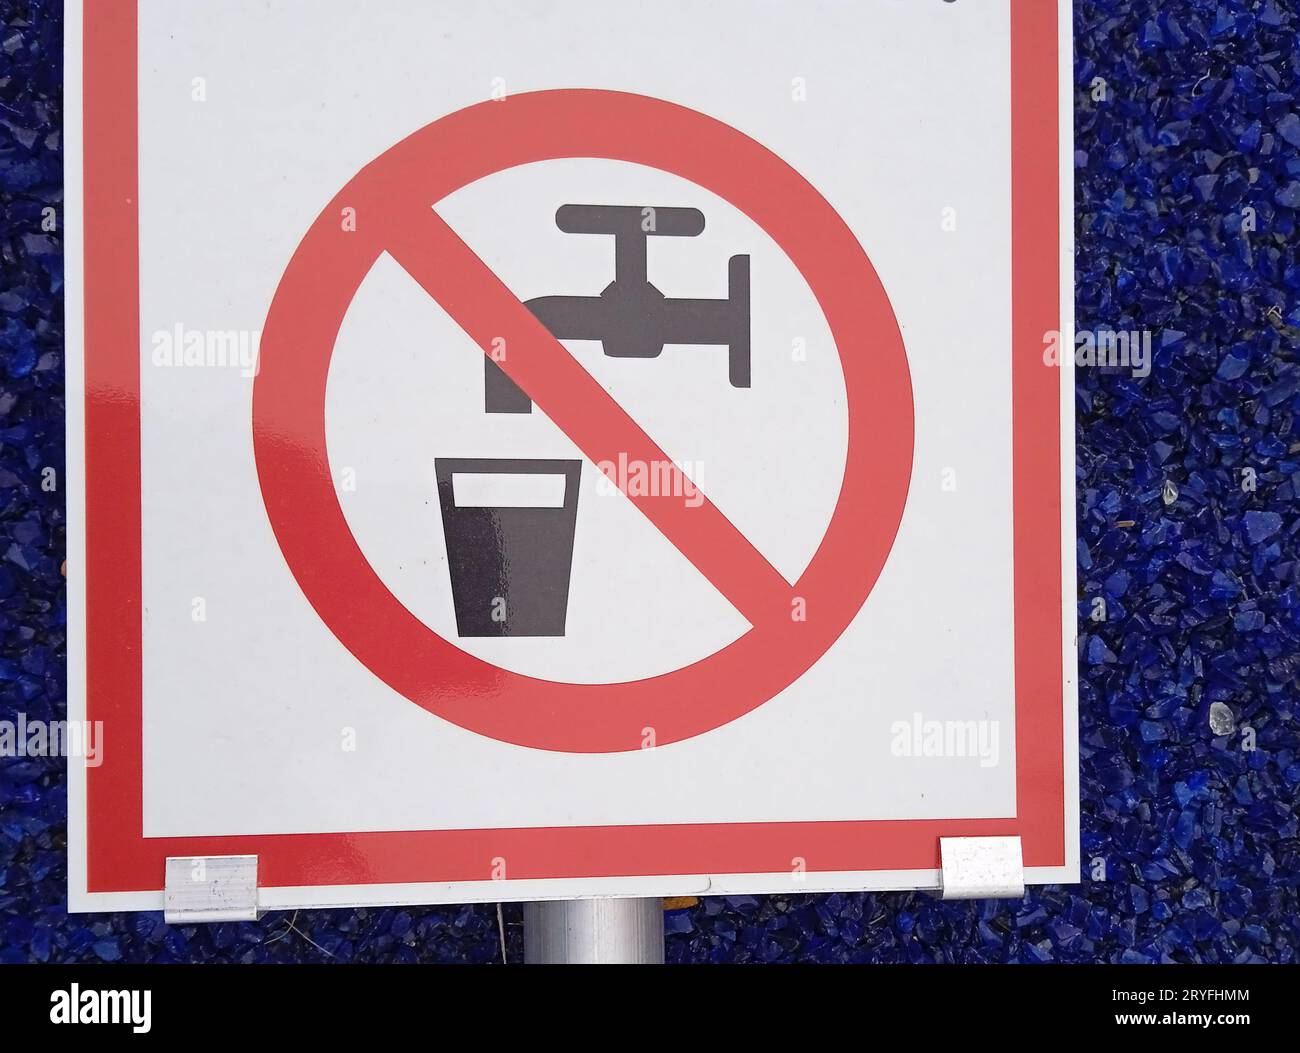 No drinking water sign and symbol Stock Photo